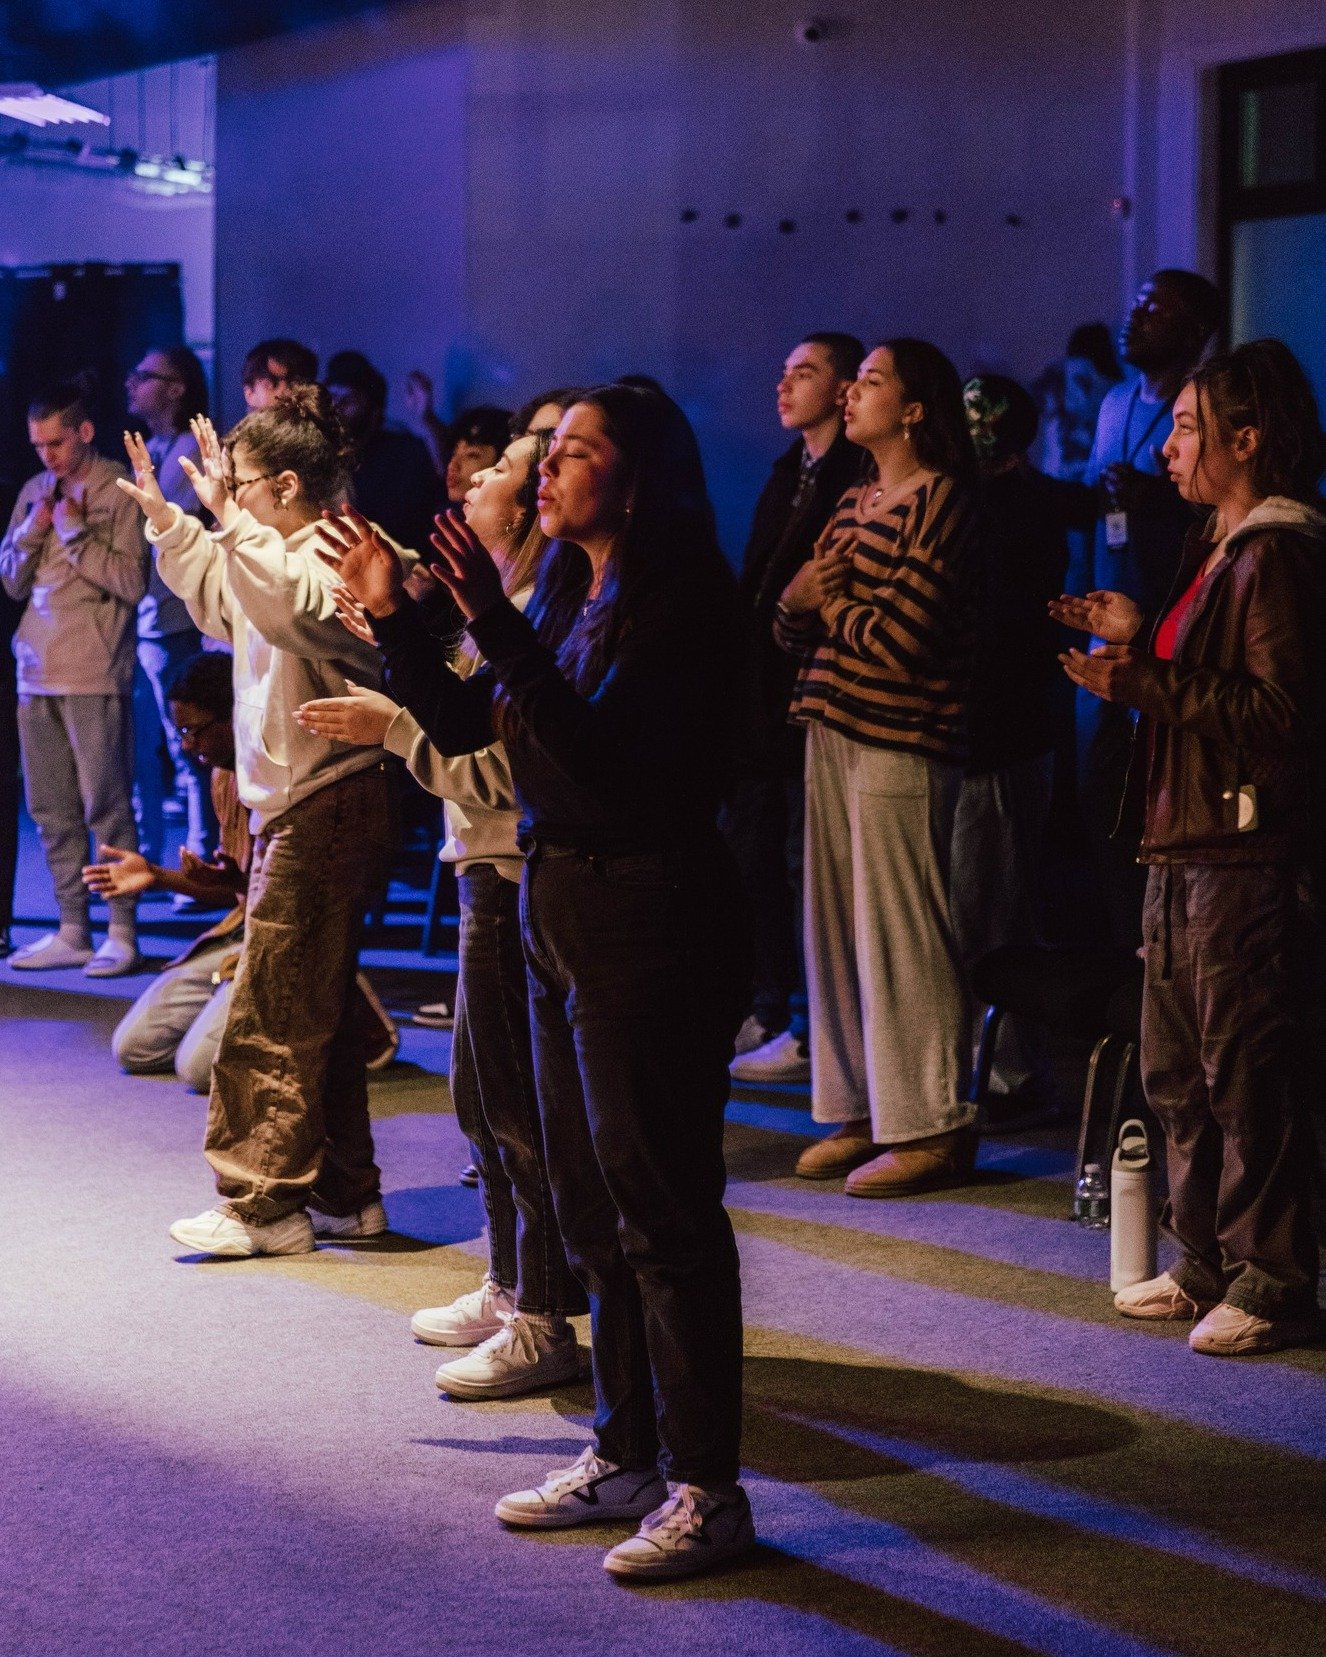 Pressing rewind to our Youth Night moments🔥🙌

What voice is your life built on?📖
.
.
.
#JesusIsLord #LegacyYouth #YouthNight #worship #BringAFriend #Fridays #WarwickRI